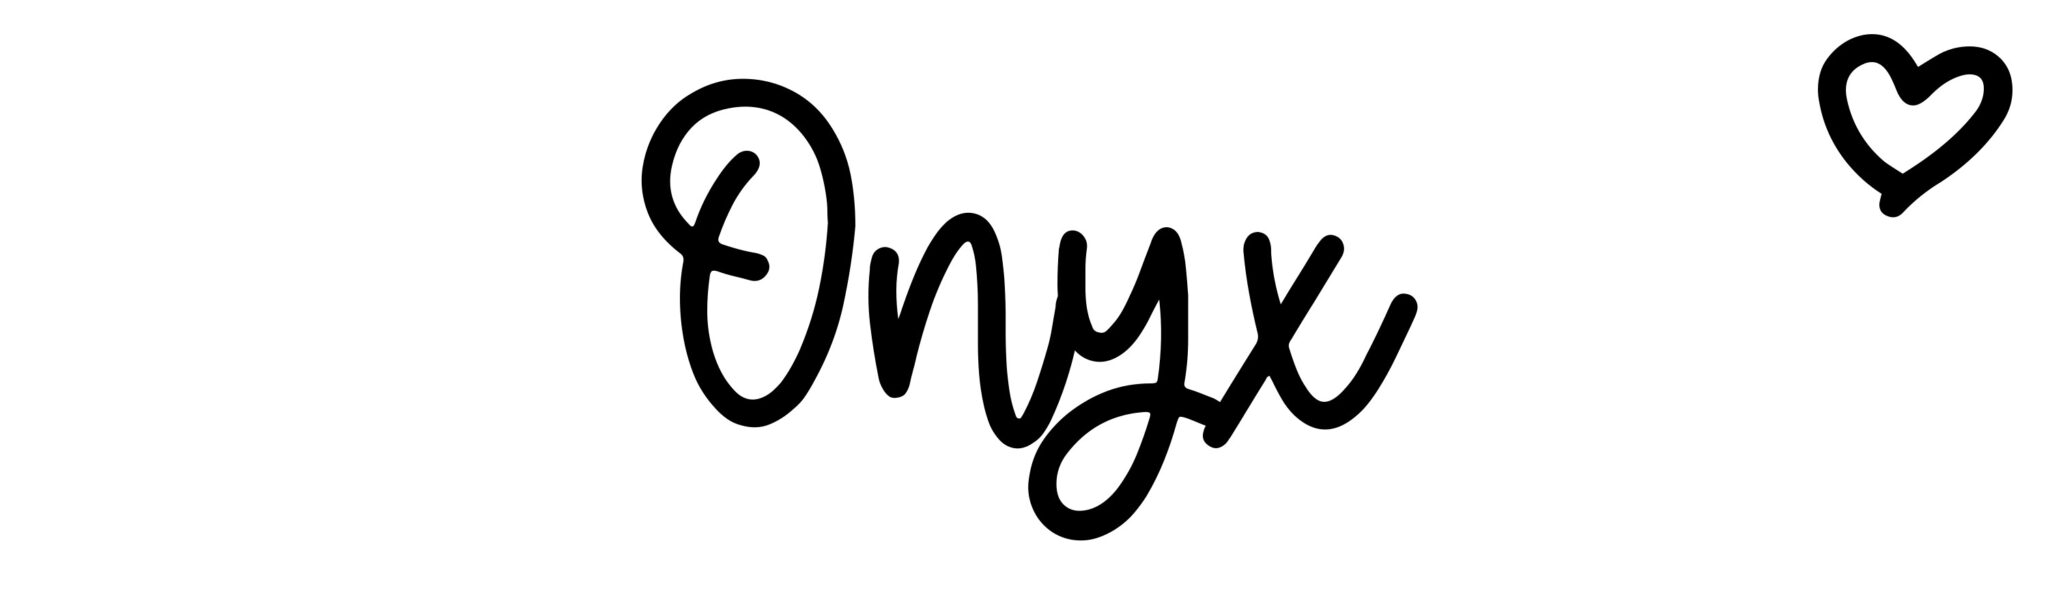 onyx name meaning pronunciation